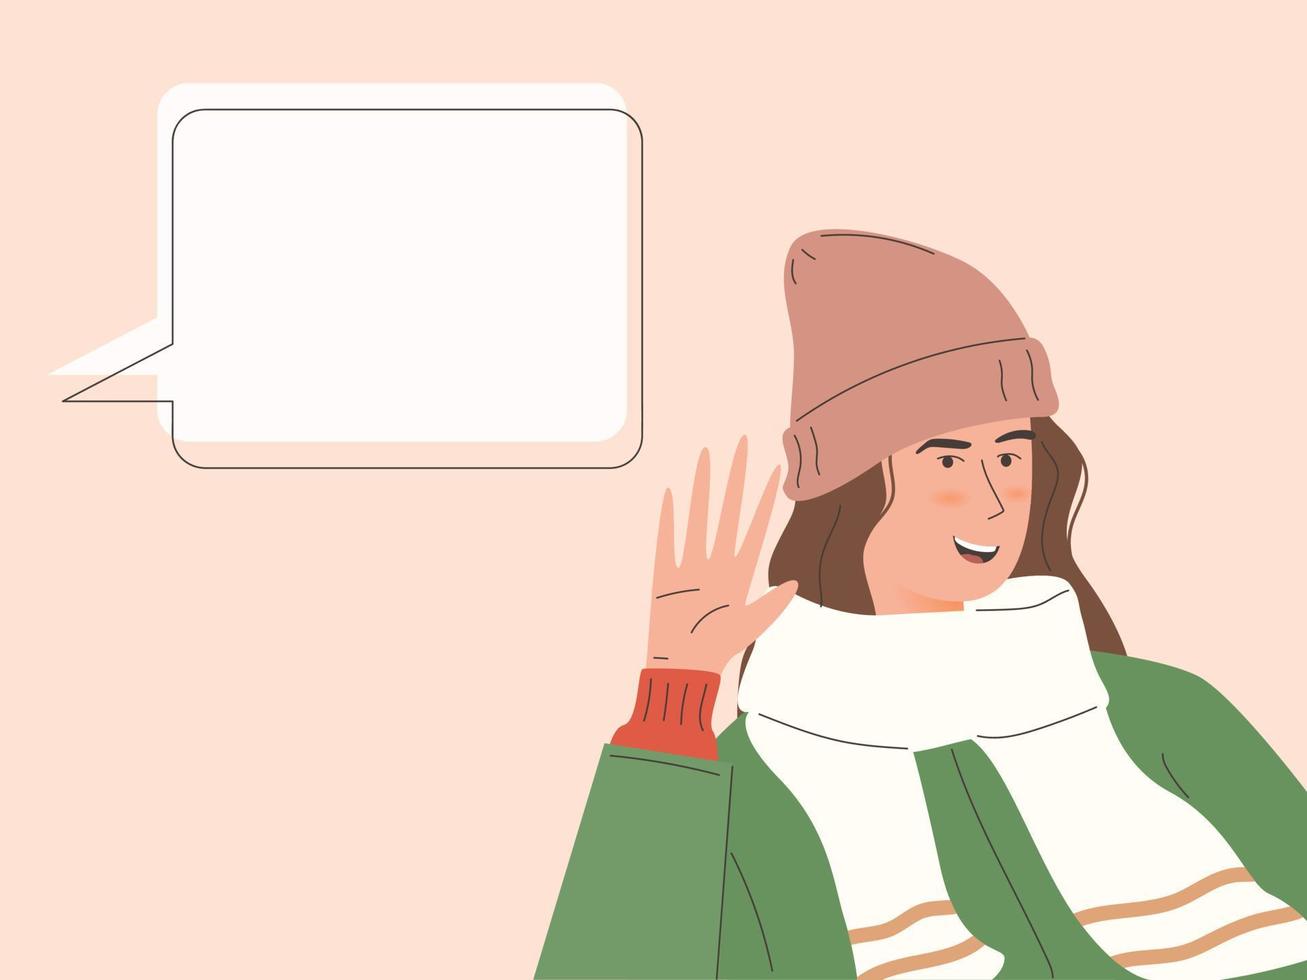 woman wearing winter outfit listens with hand illustration vector